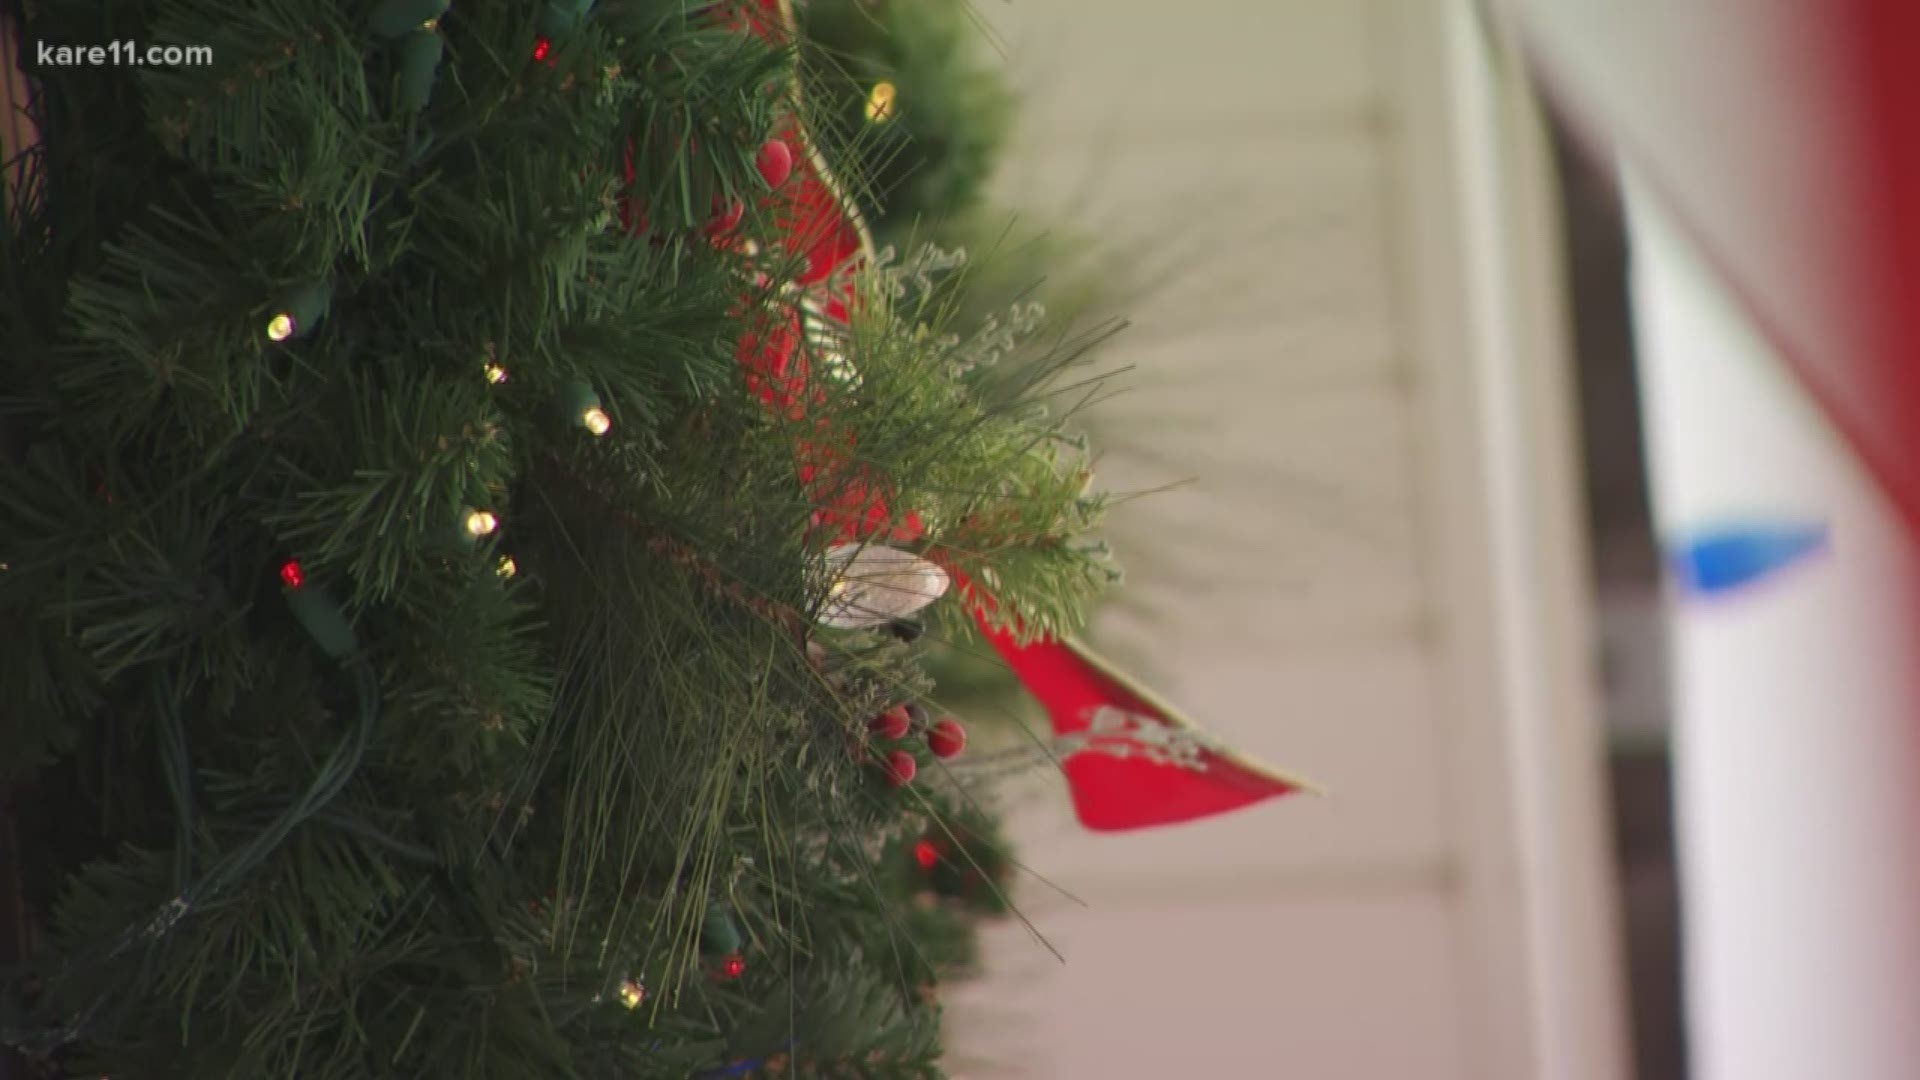 A Wisconsin soldier finds out he won't be home for Christmas, but his community steps up for a very special surprise for his family.